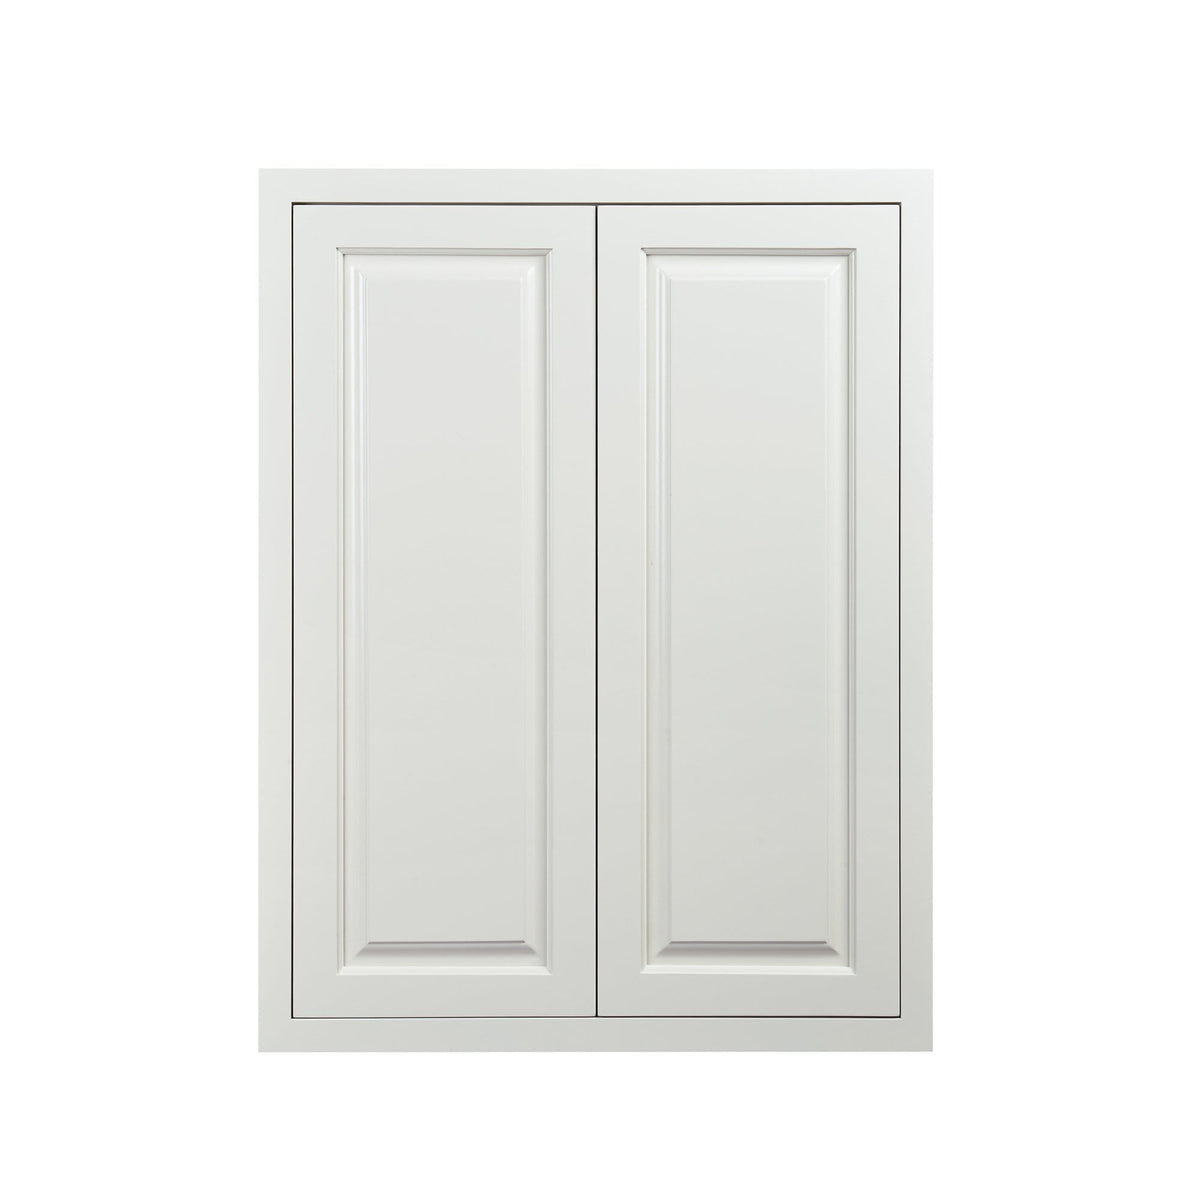 30" Tall Vintage White Inset Raised Panel Wall Cabinet - Double Door 24", 27", 30", 33"& 36"